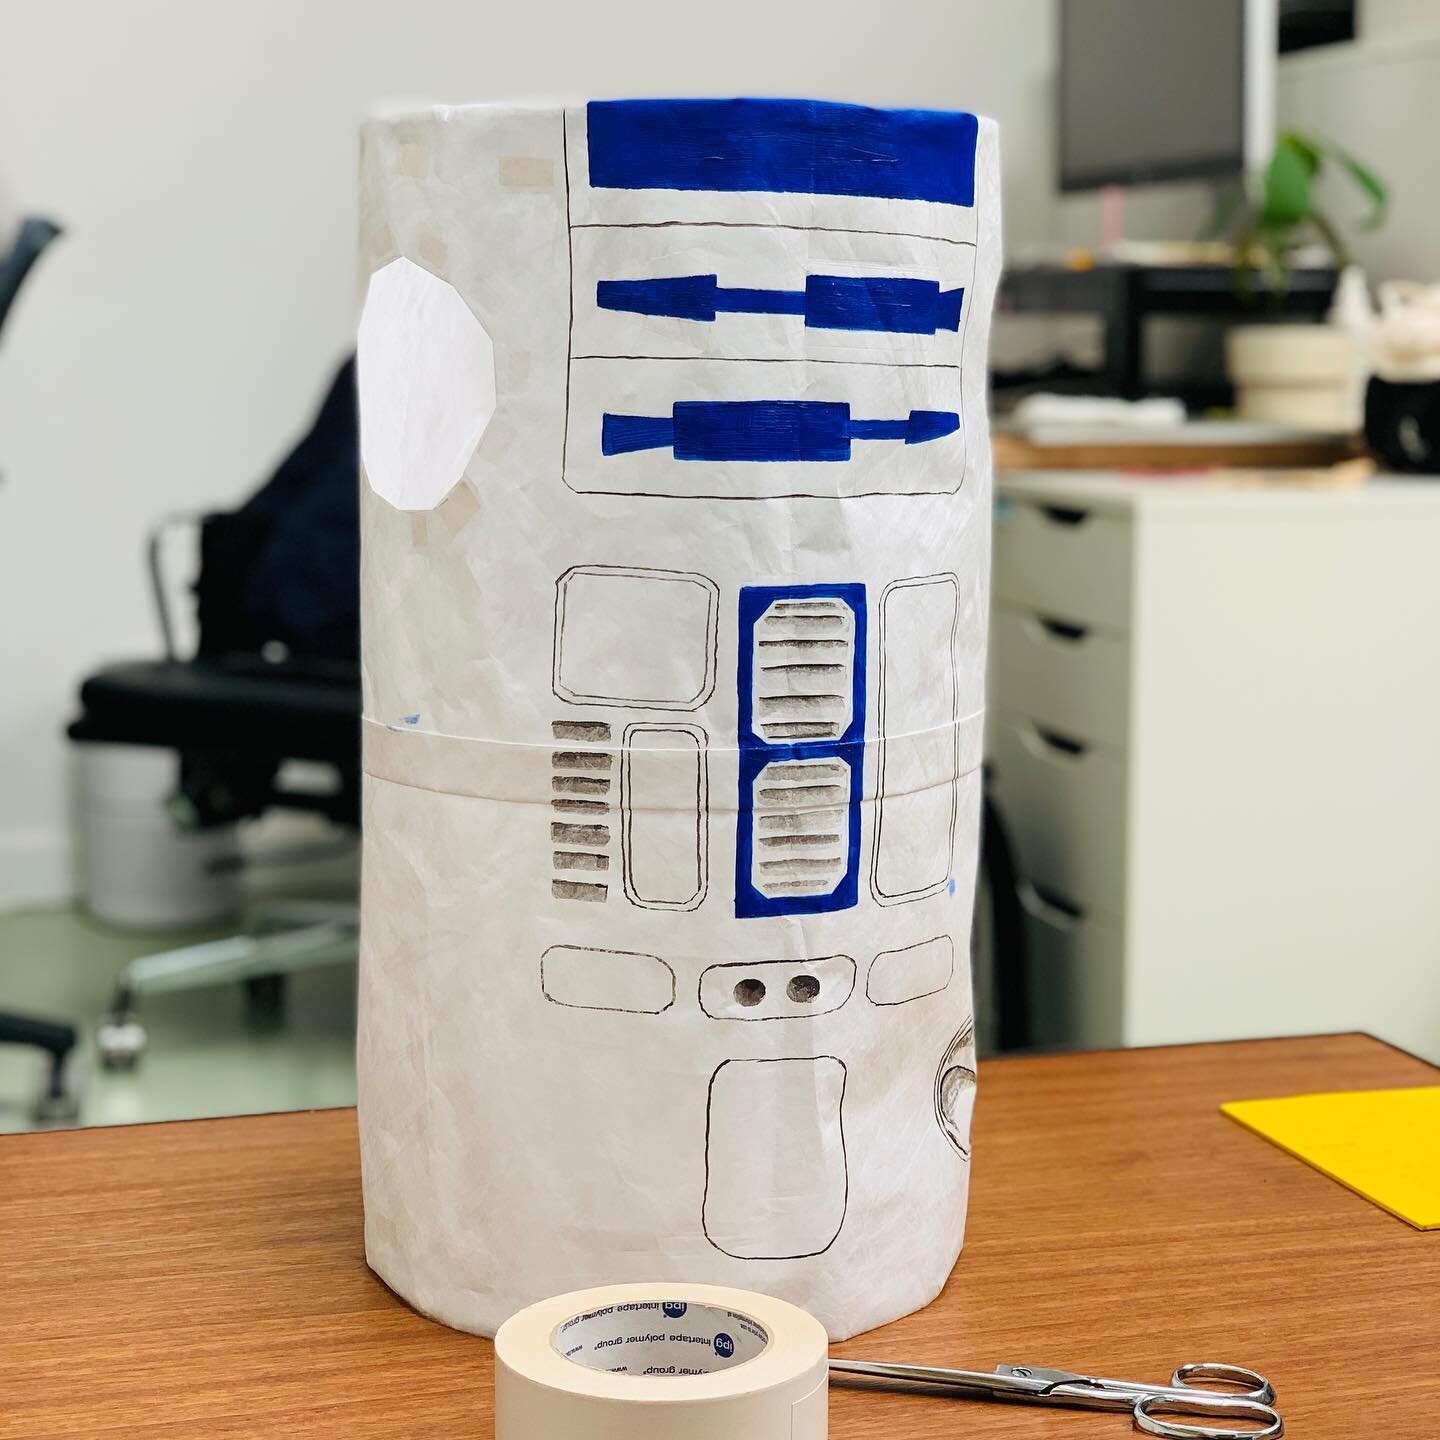 Activated our #tomsachs skillz for this #r2d2 bod.
#missioncomplete

✖️
⠀⠀⠀⠀⠀⠀⠀⠀⠀
#oakland #design #designinspo #designinspiration #graphicdesign #graphicdesigner #color #composition #designer #designers #creative #creatives #artist #artoftheday #pic